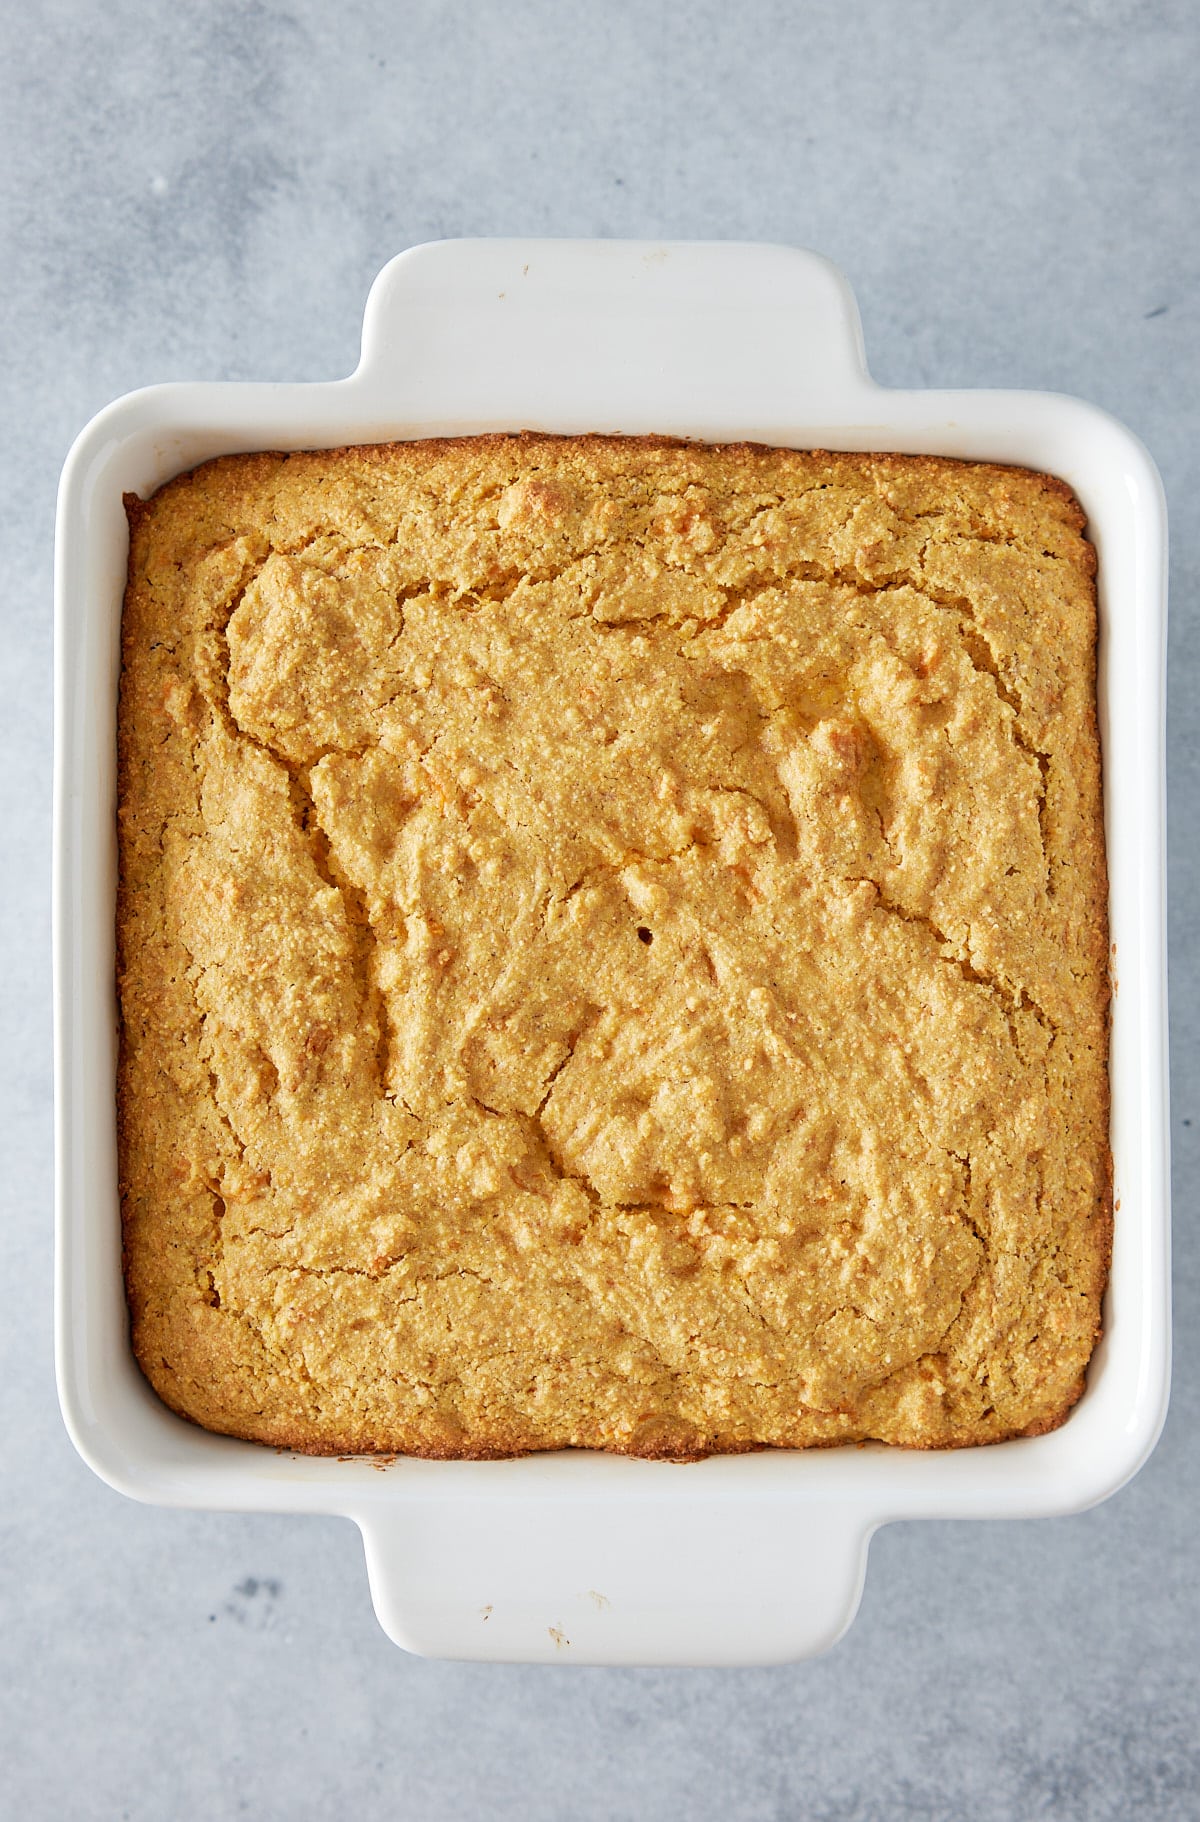 White square oven proof dish with baked sweet potato cornbread